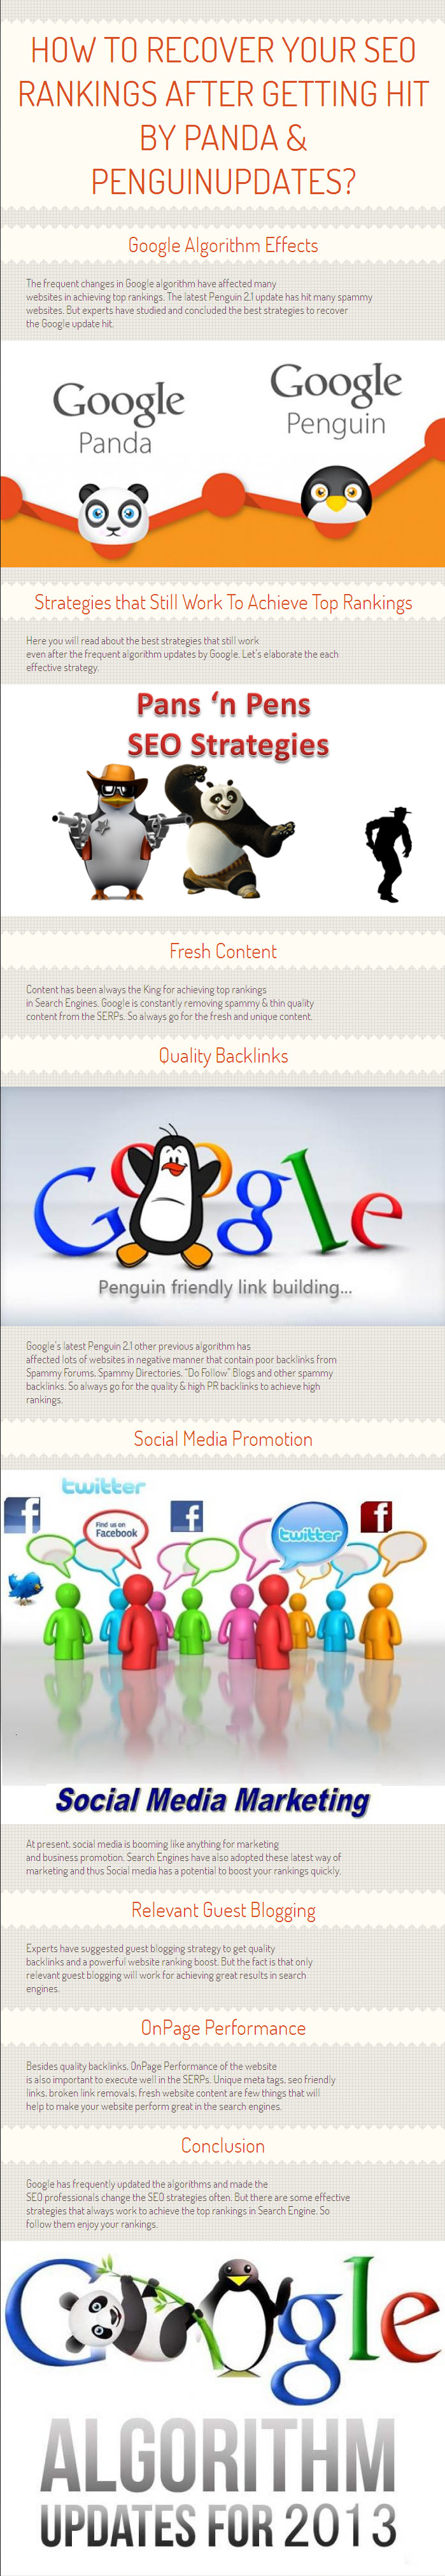 How To Recover Your SEO Rankings After Getting Hit By Panda & Penguin Updates By www.topranker.biz